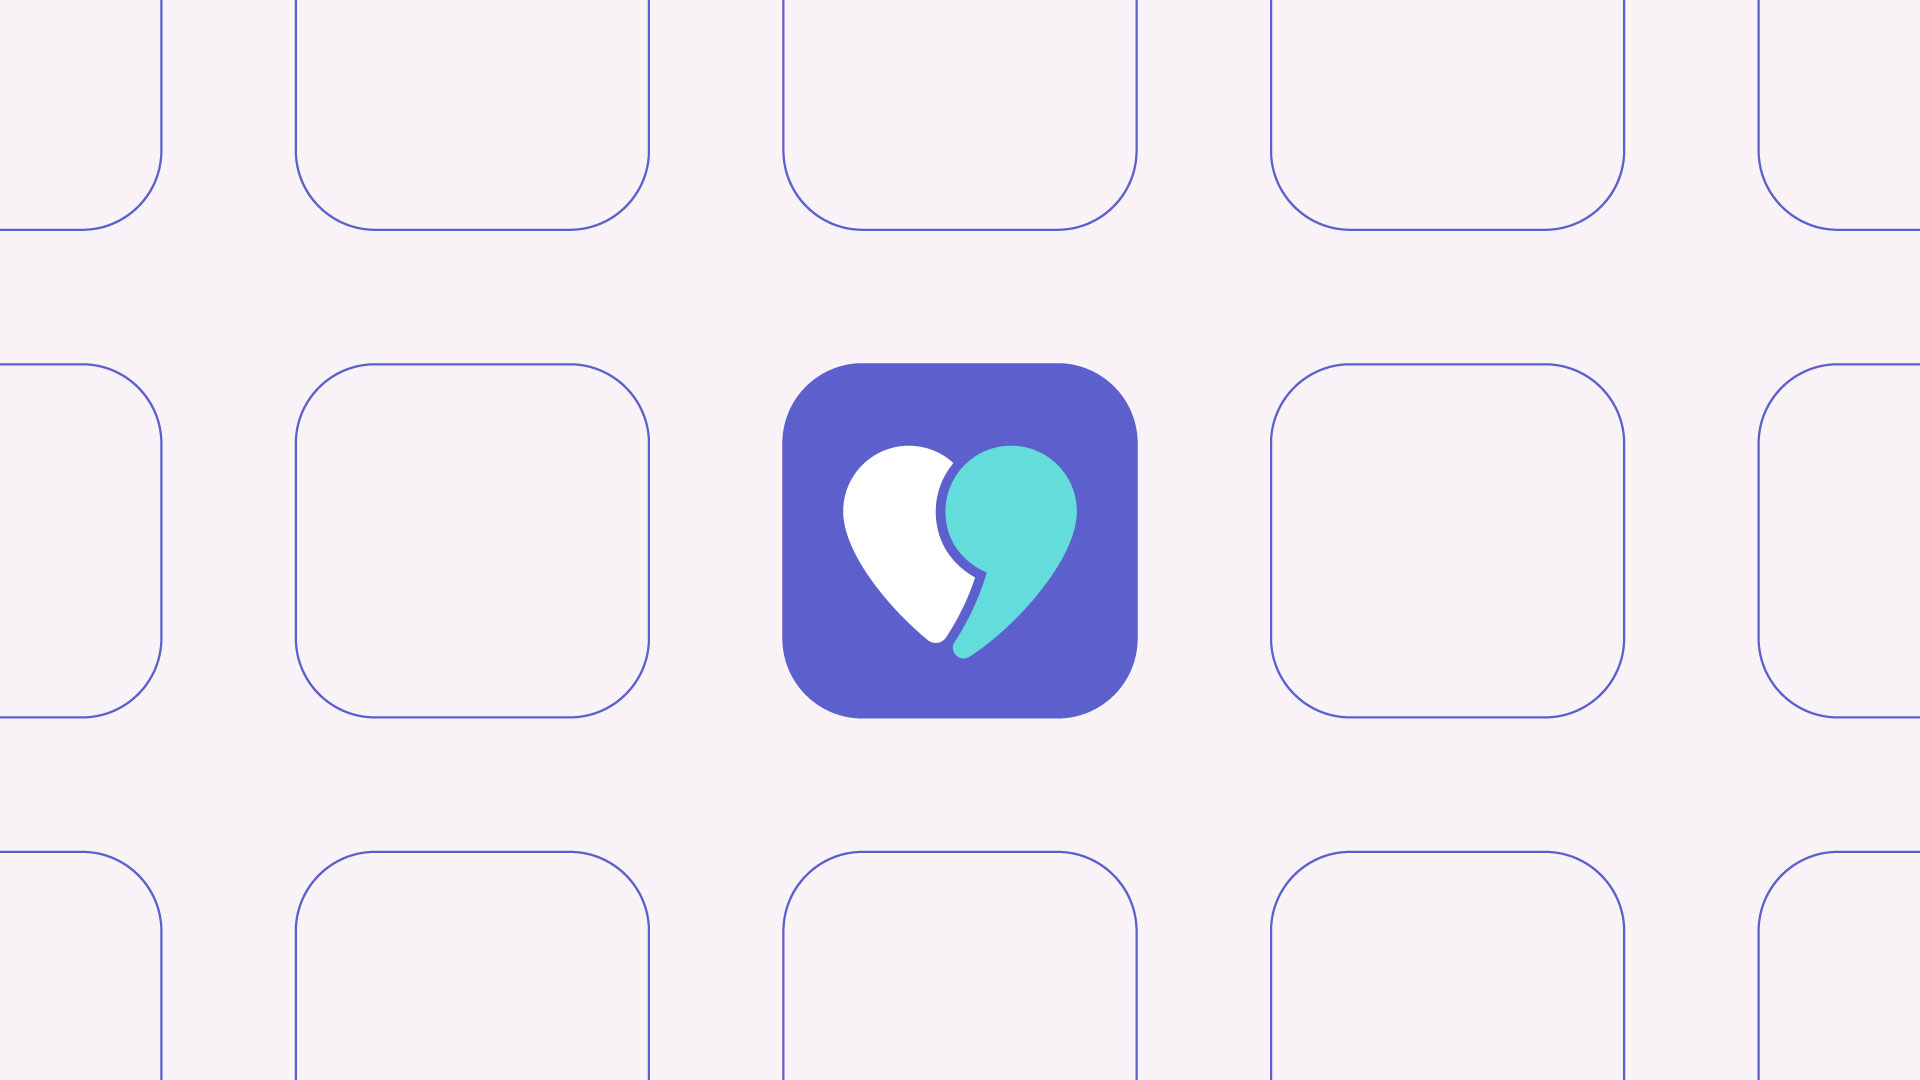 Smartphone app icon design using the Luvvi icon reversed out on a lilac background.